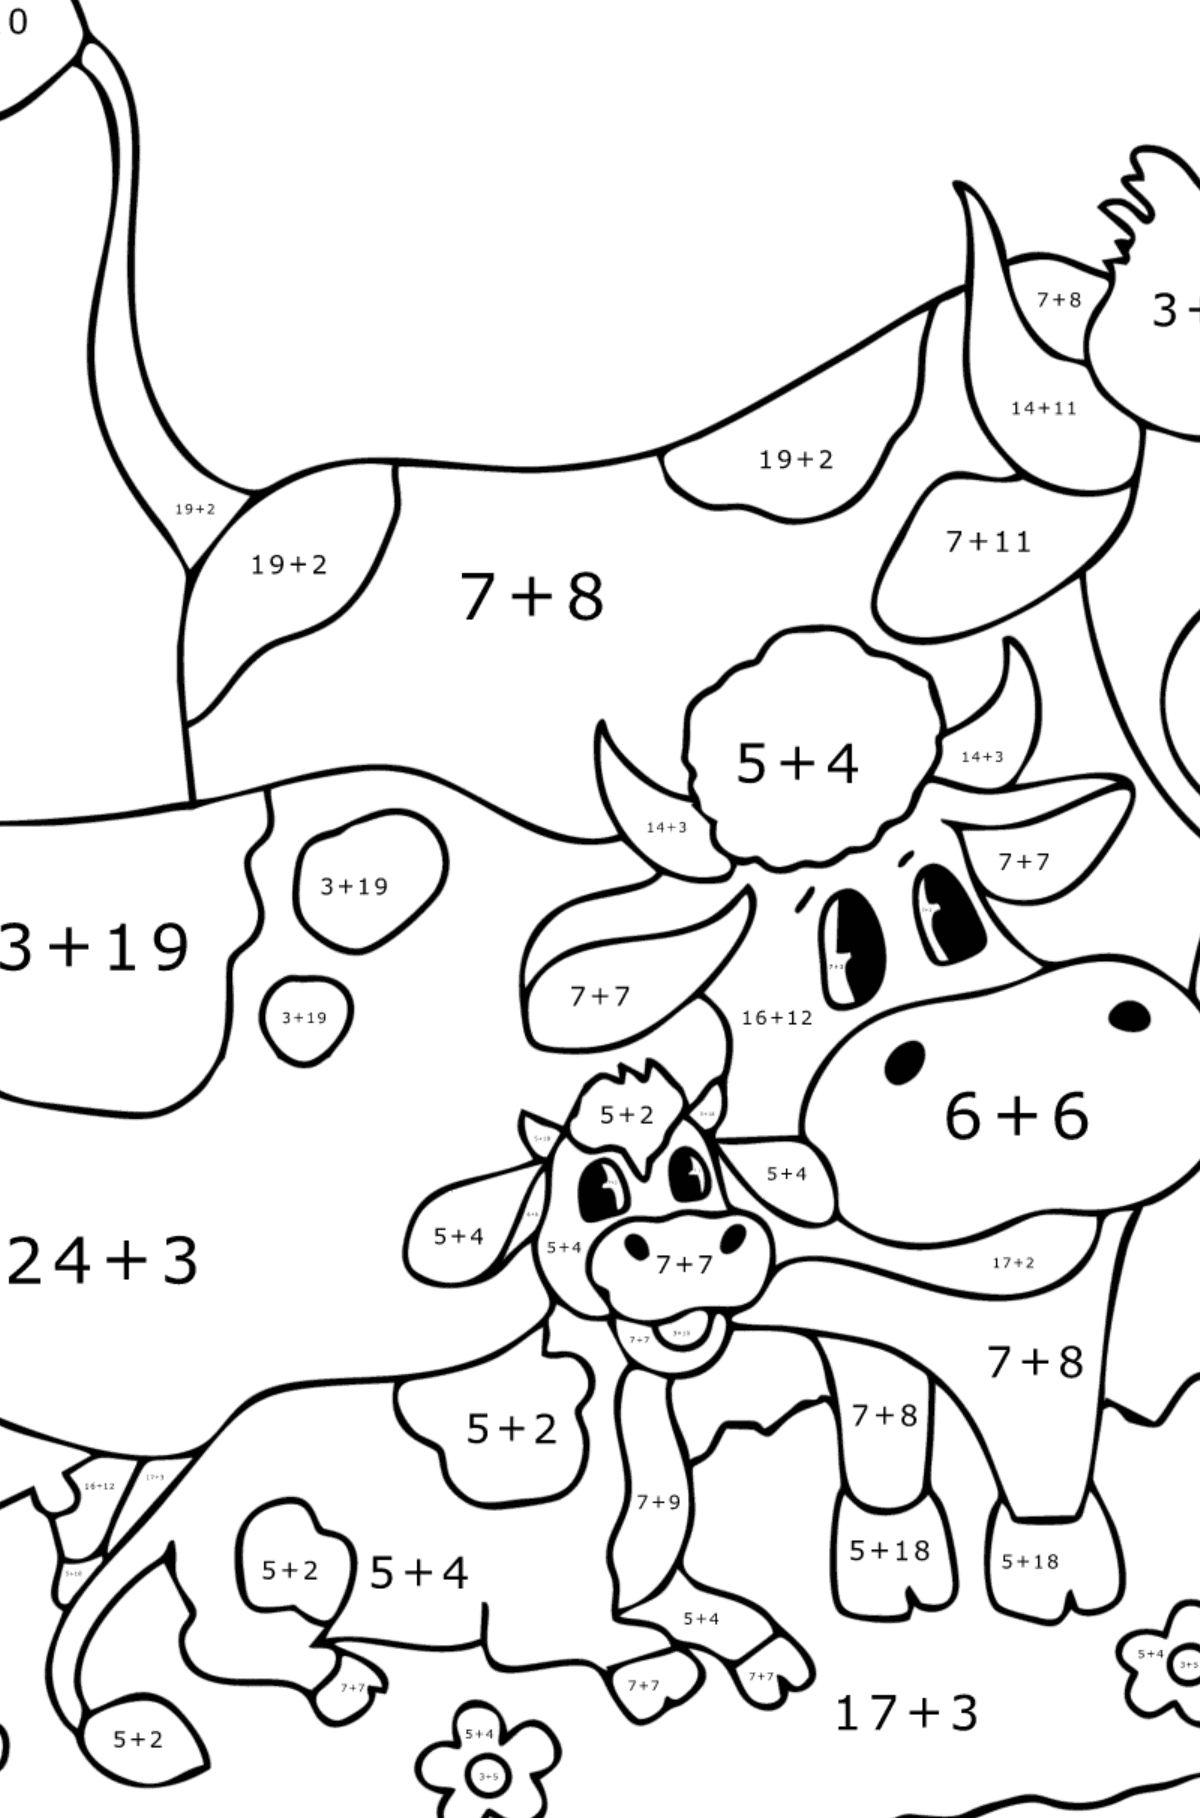 Cow, bull and calf coloring page - Math Coloring - Addition for Kids